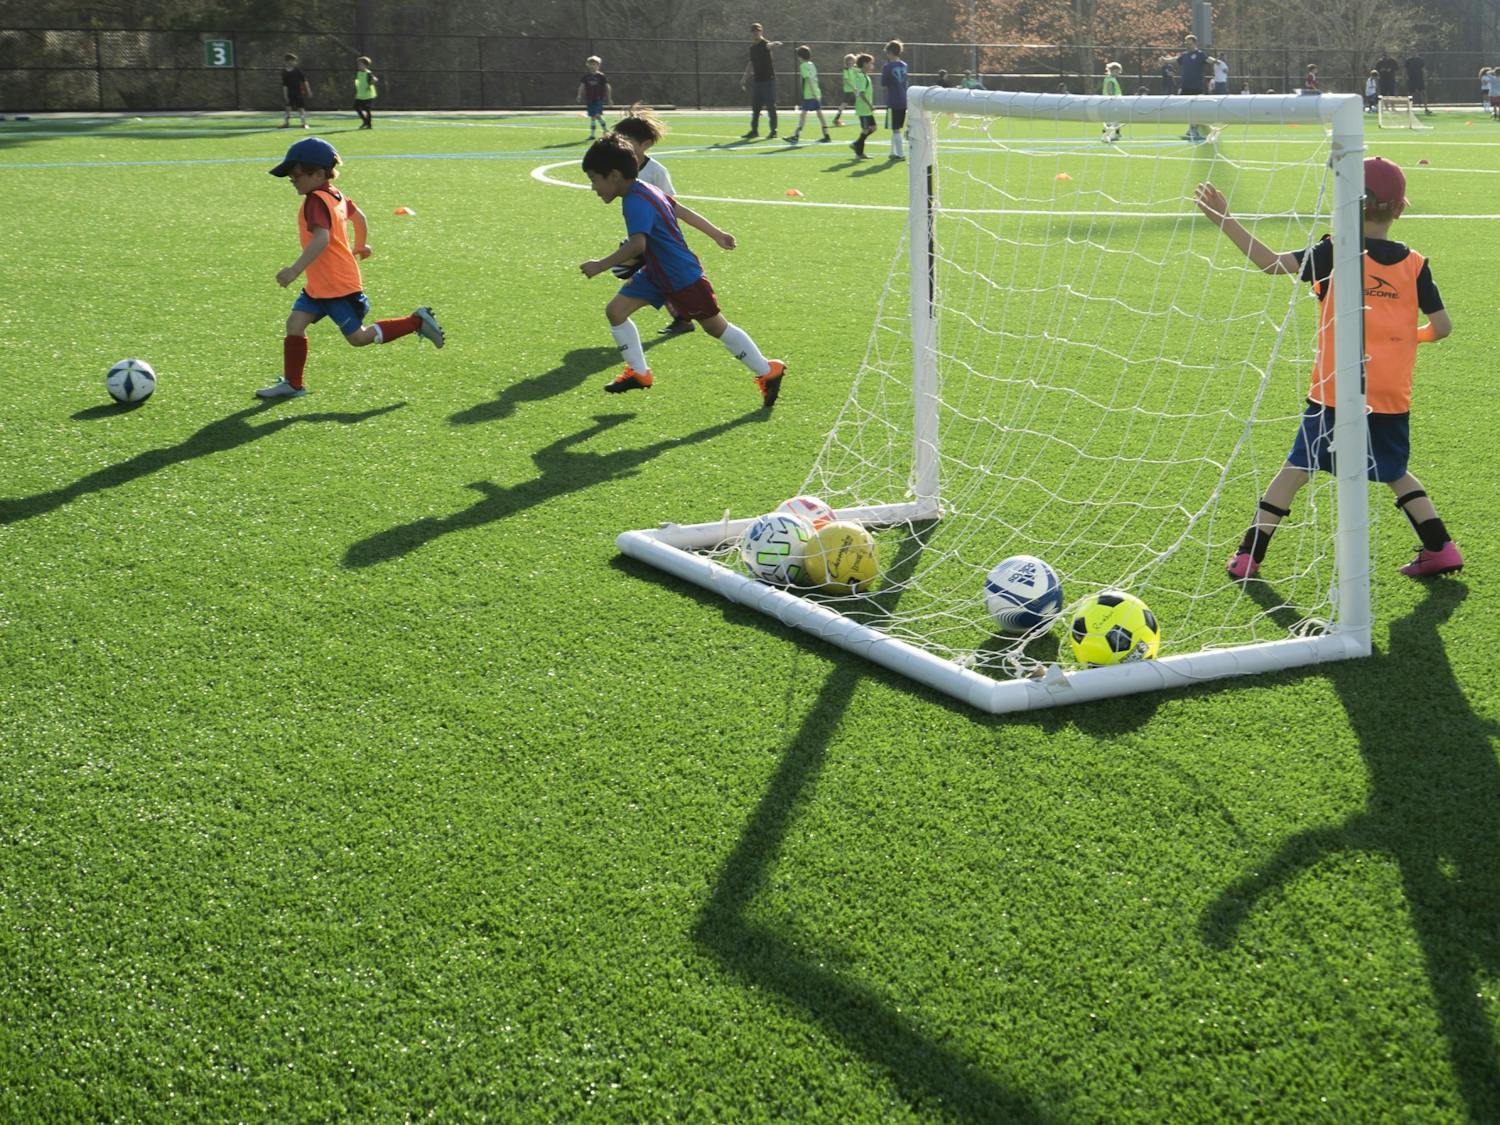 Young soccer players do a drill with their team on the new turf at Cedar Falls Park in Chapel Hill, N.C., on Thursday, Mar. 23, 2023. The Town of Chapel Hill held a ribbon-cutting ceremony to celebrate the freshly redone, environmentally-friendly turf for the multi-purpose field.